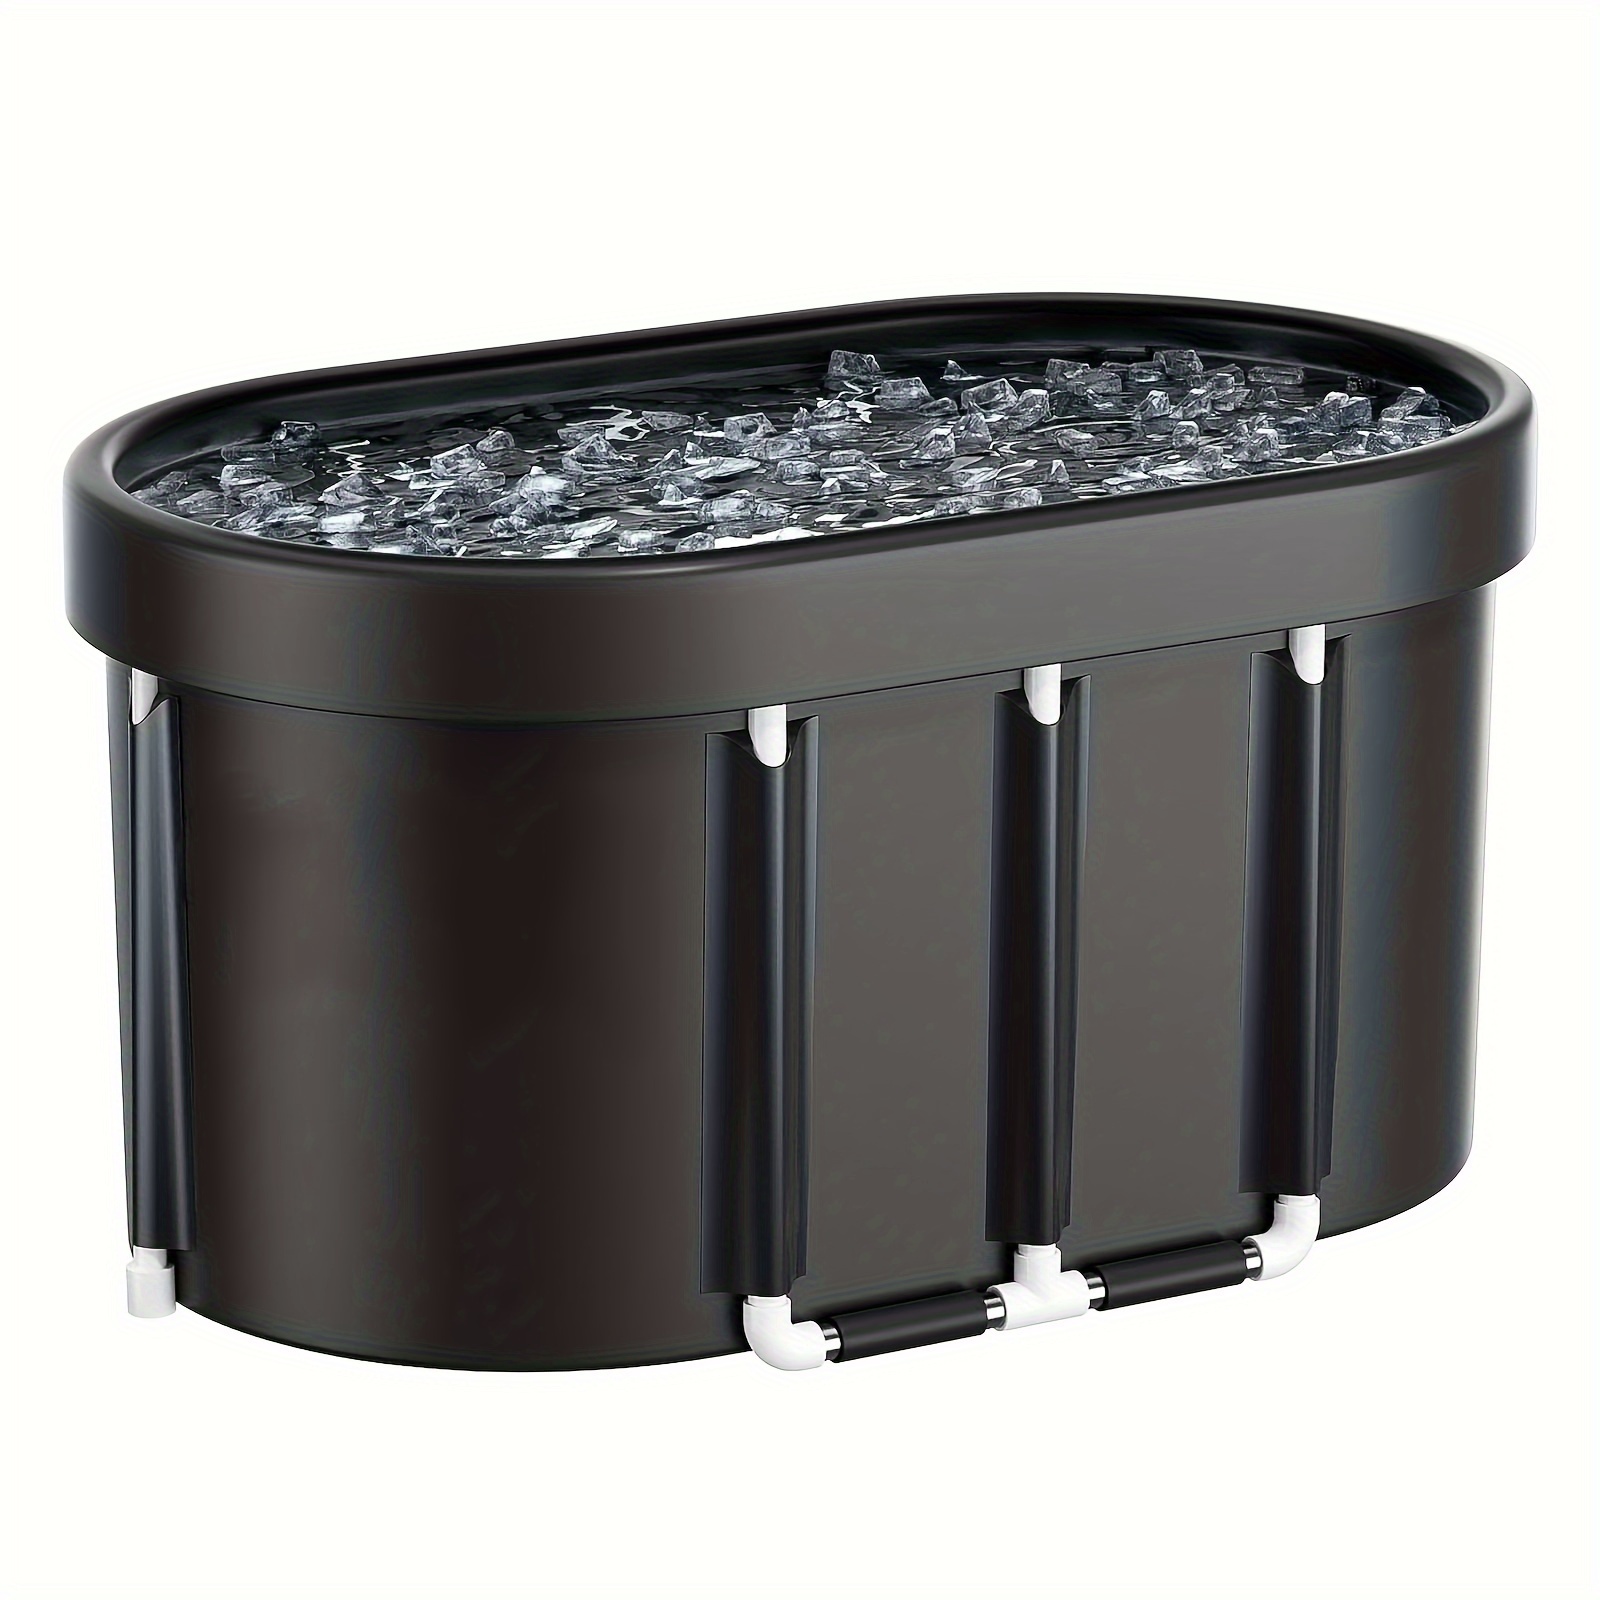 

1pc Oval 124-gallon Ice Bath Tub With Lid, Portable Cold Water Therapy Pool, Sturdy Aluminum Pillar Construction, For Athlete Recovery And Spa, Home Gym Outdoor Use, Black